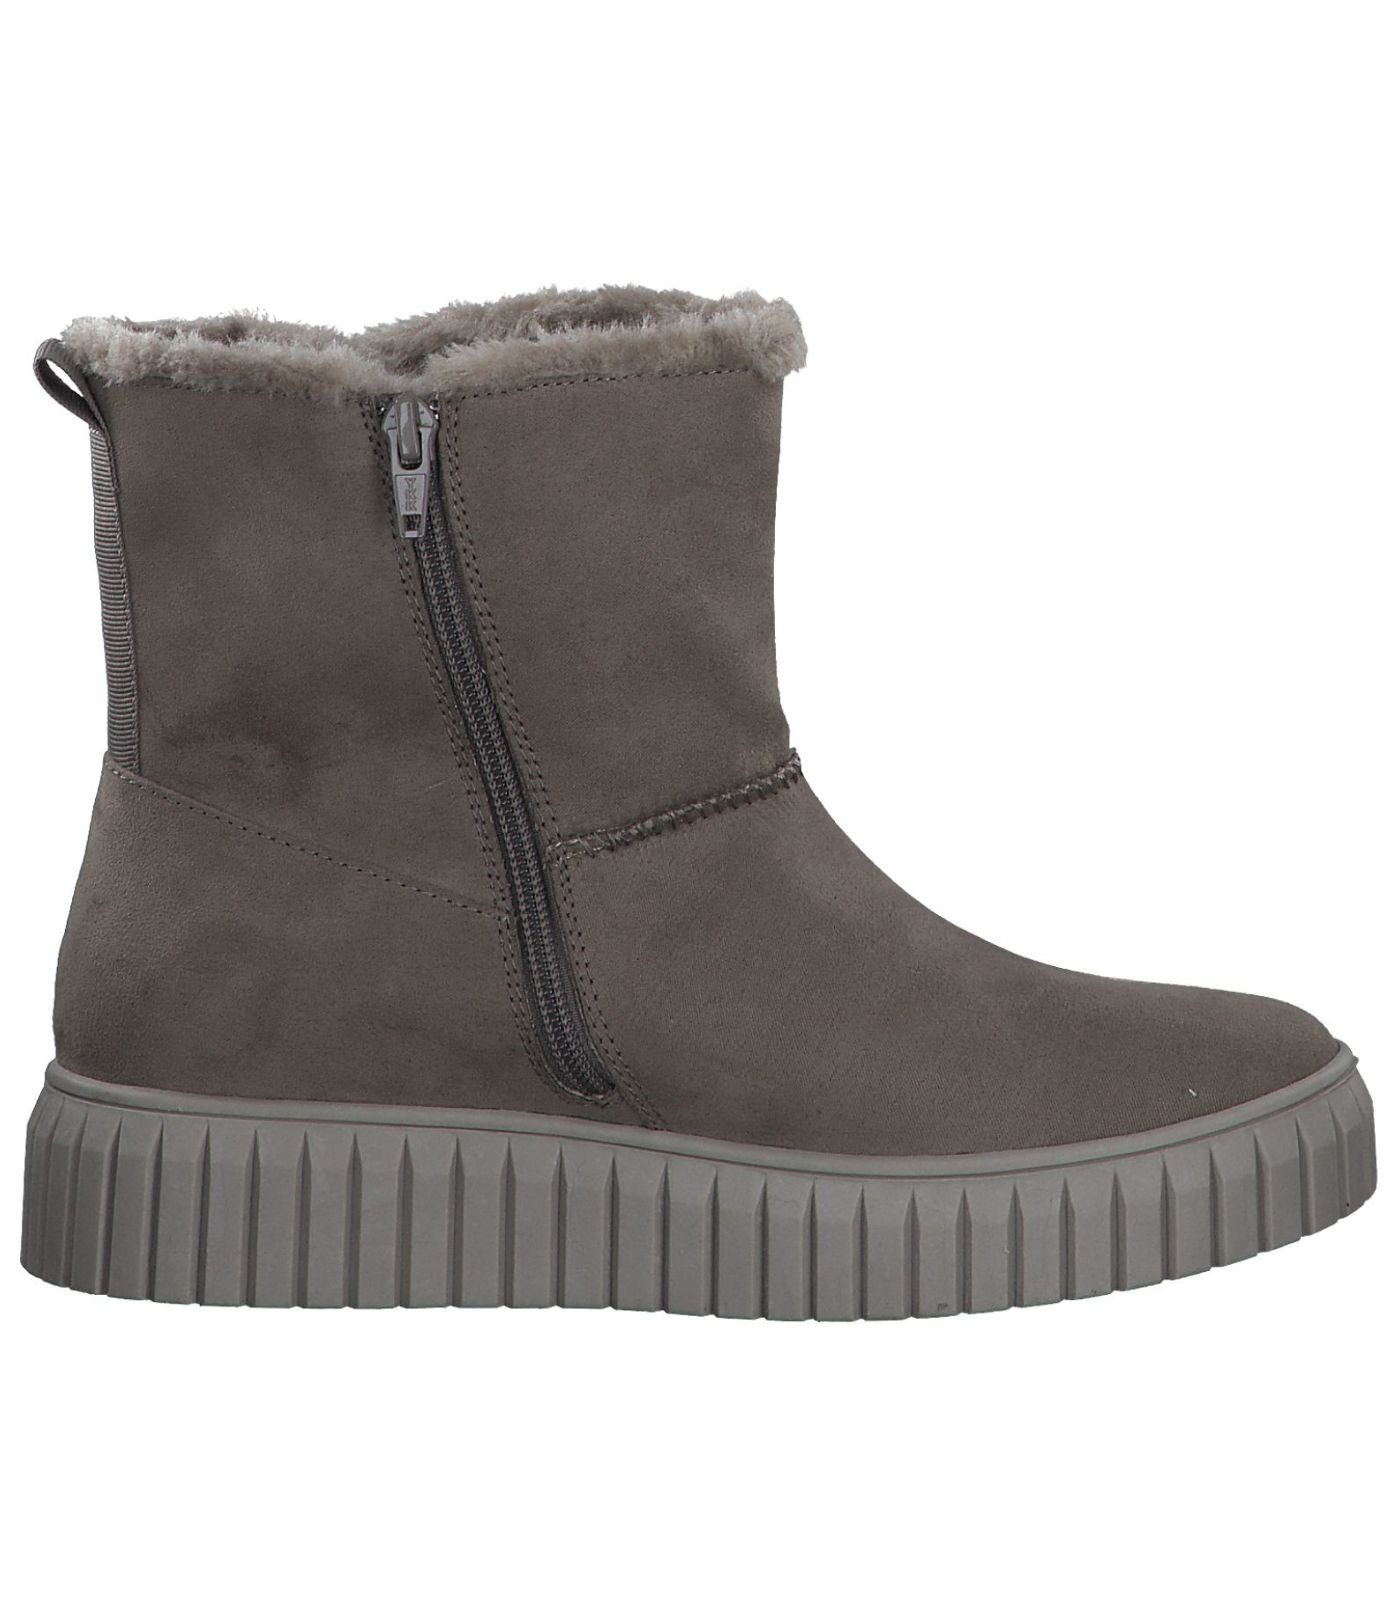 Stiefelette s.Oliver Taupe Textil Stiefelette